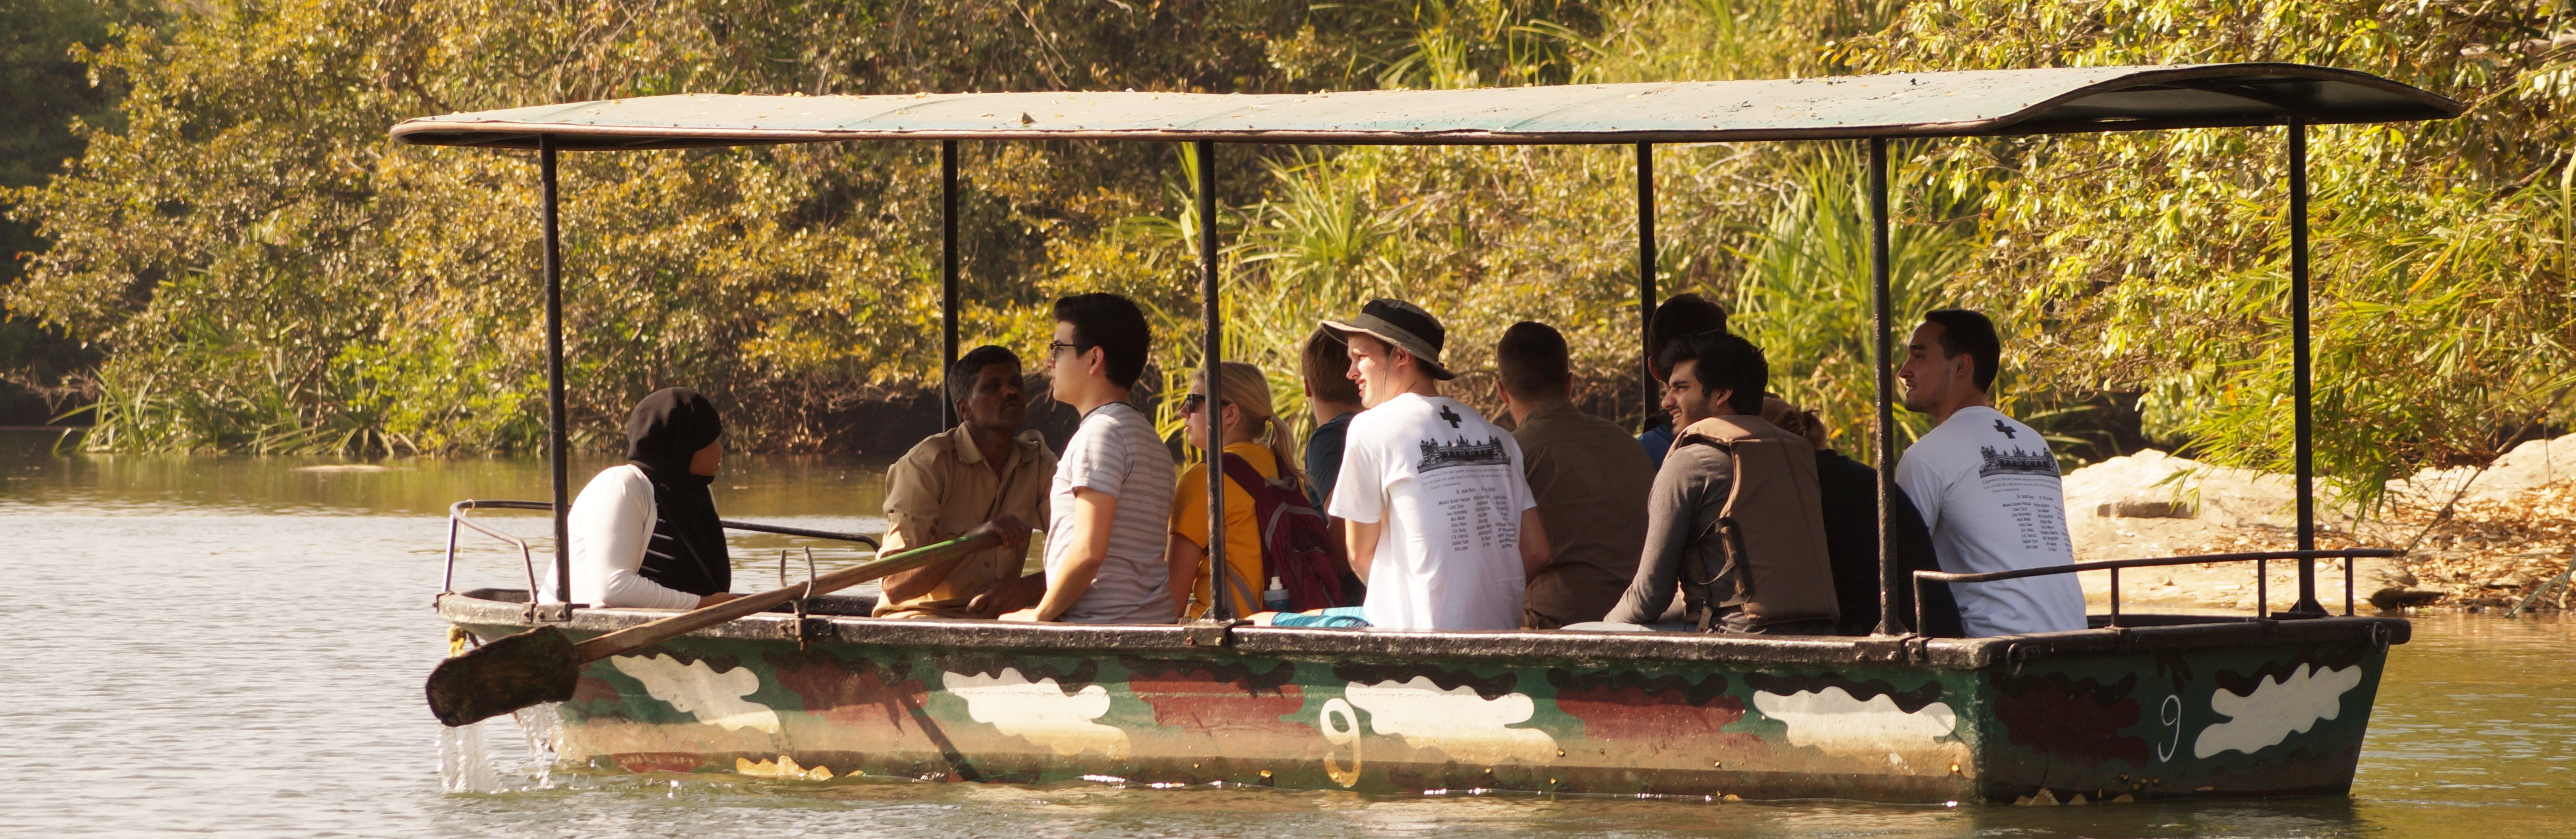 Students on a boat in India